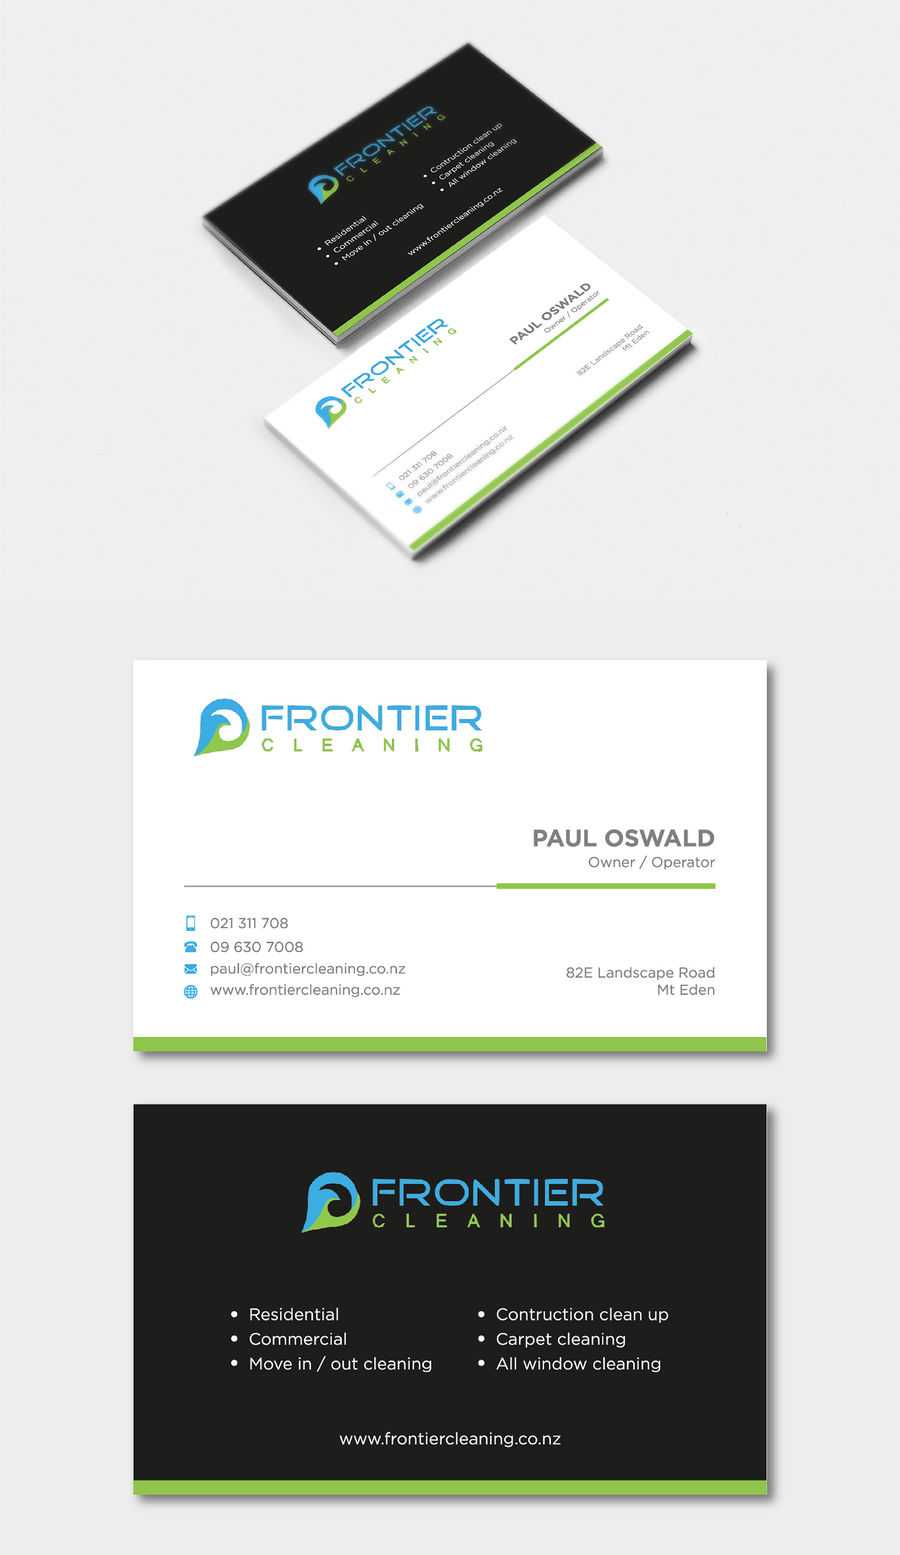 Entry #21Athursinai For Design A 3 Fold Brochure With Fold Over Business Card Template